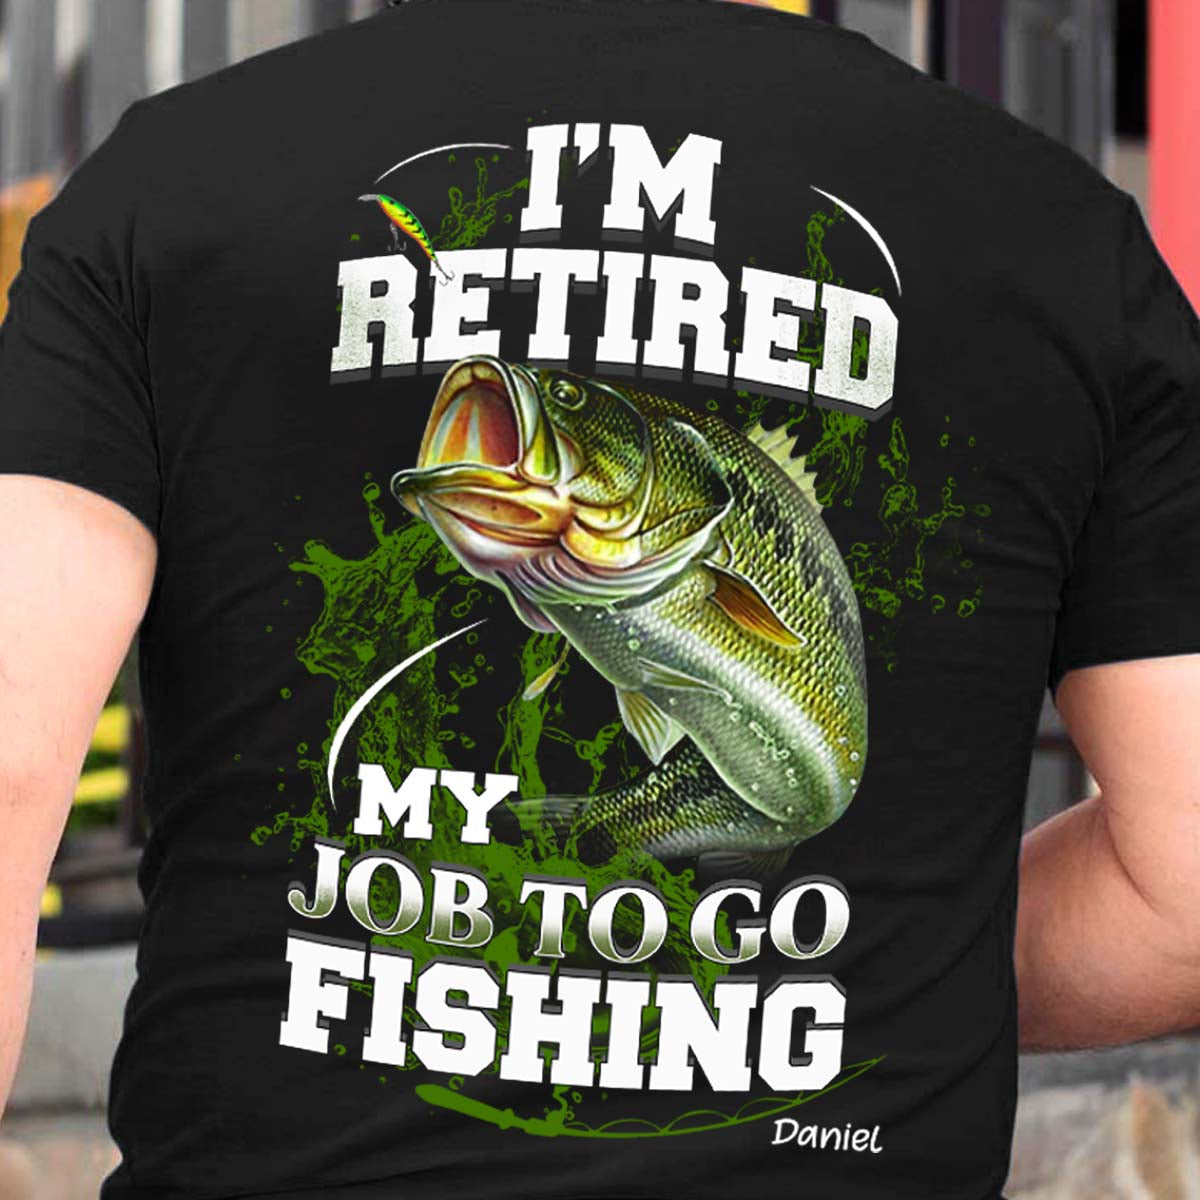 I'm Retired My Job To Go To Fishing - Personalized Back Design Apparel - Retirement Bannergg_86028107-cfbd-4149-a05e-2e5d0456f533.jpg?v=1650270446